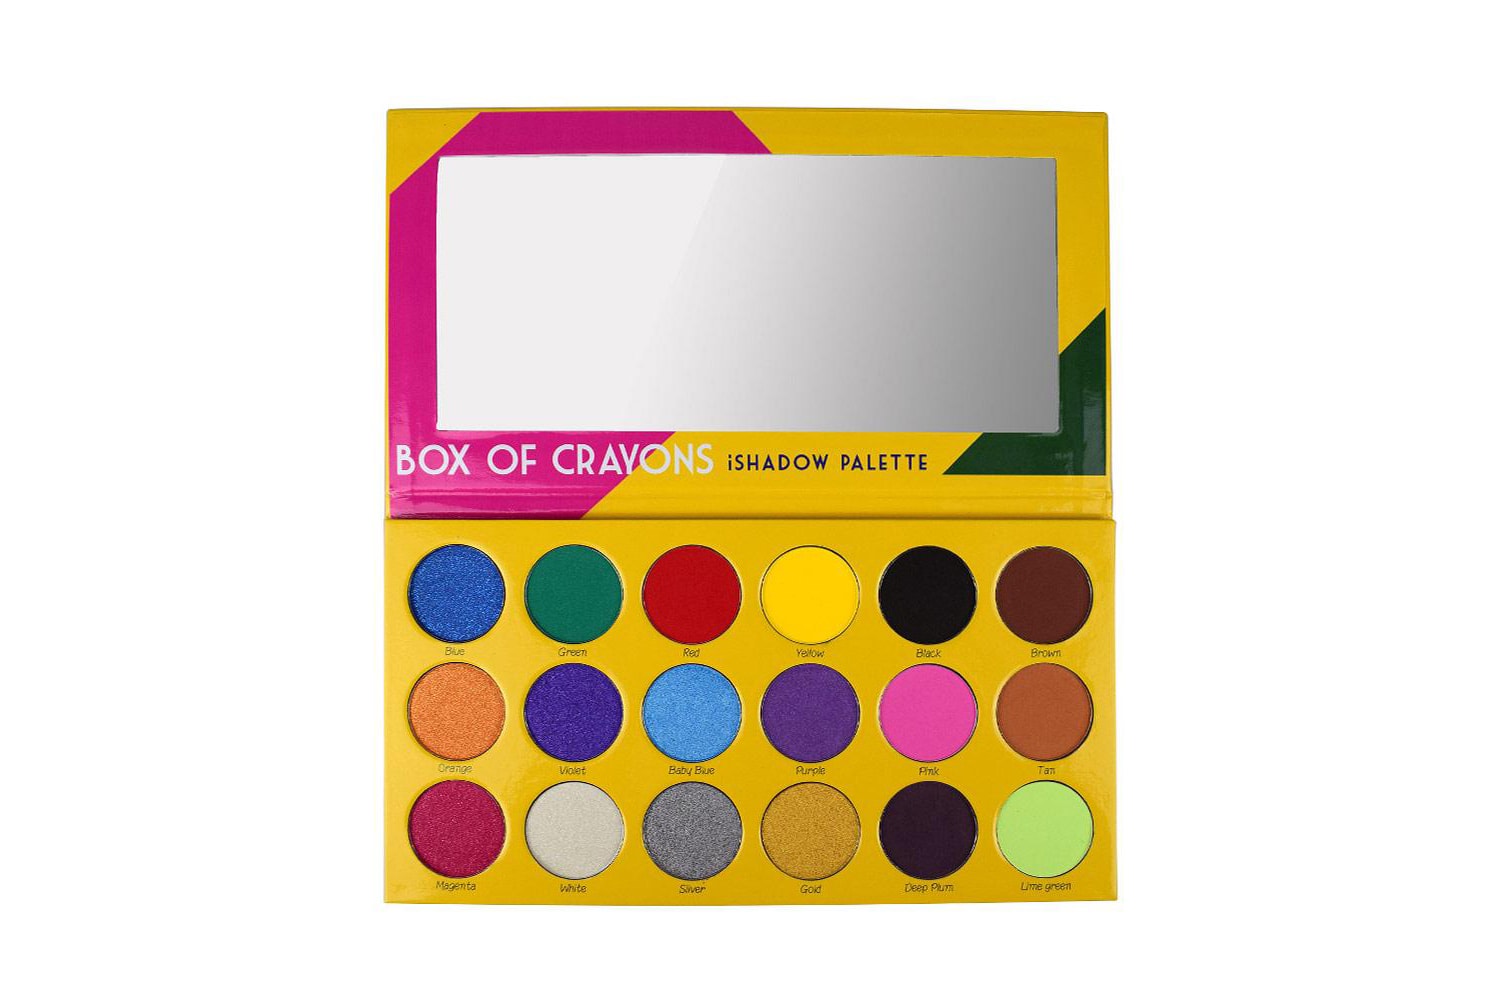 The Crayon Case Box of Crayons Eyeshadow Palette